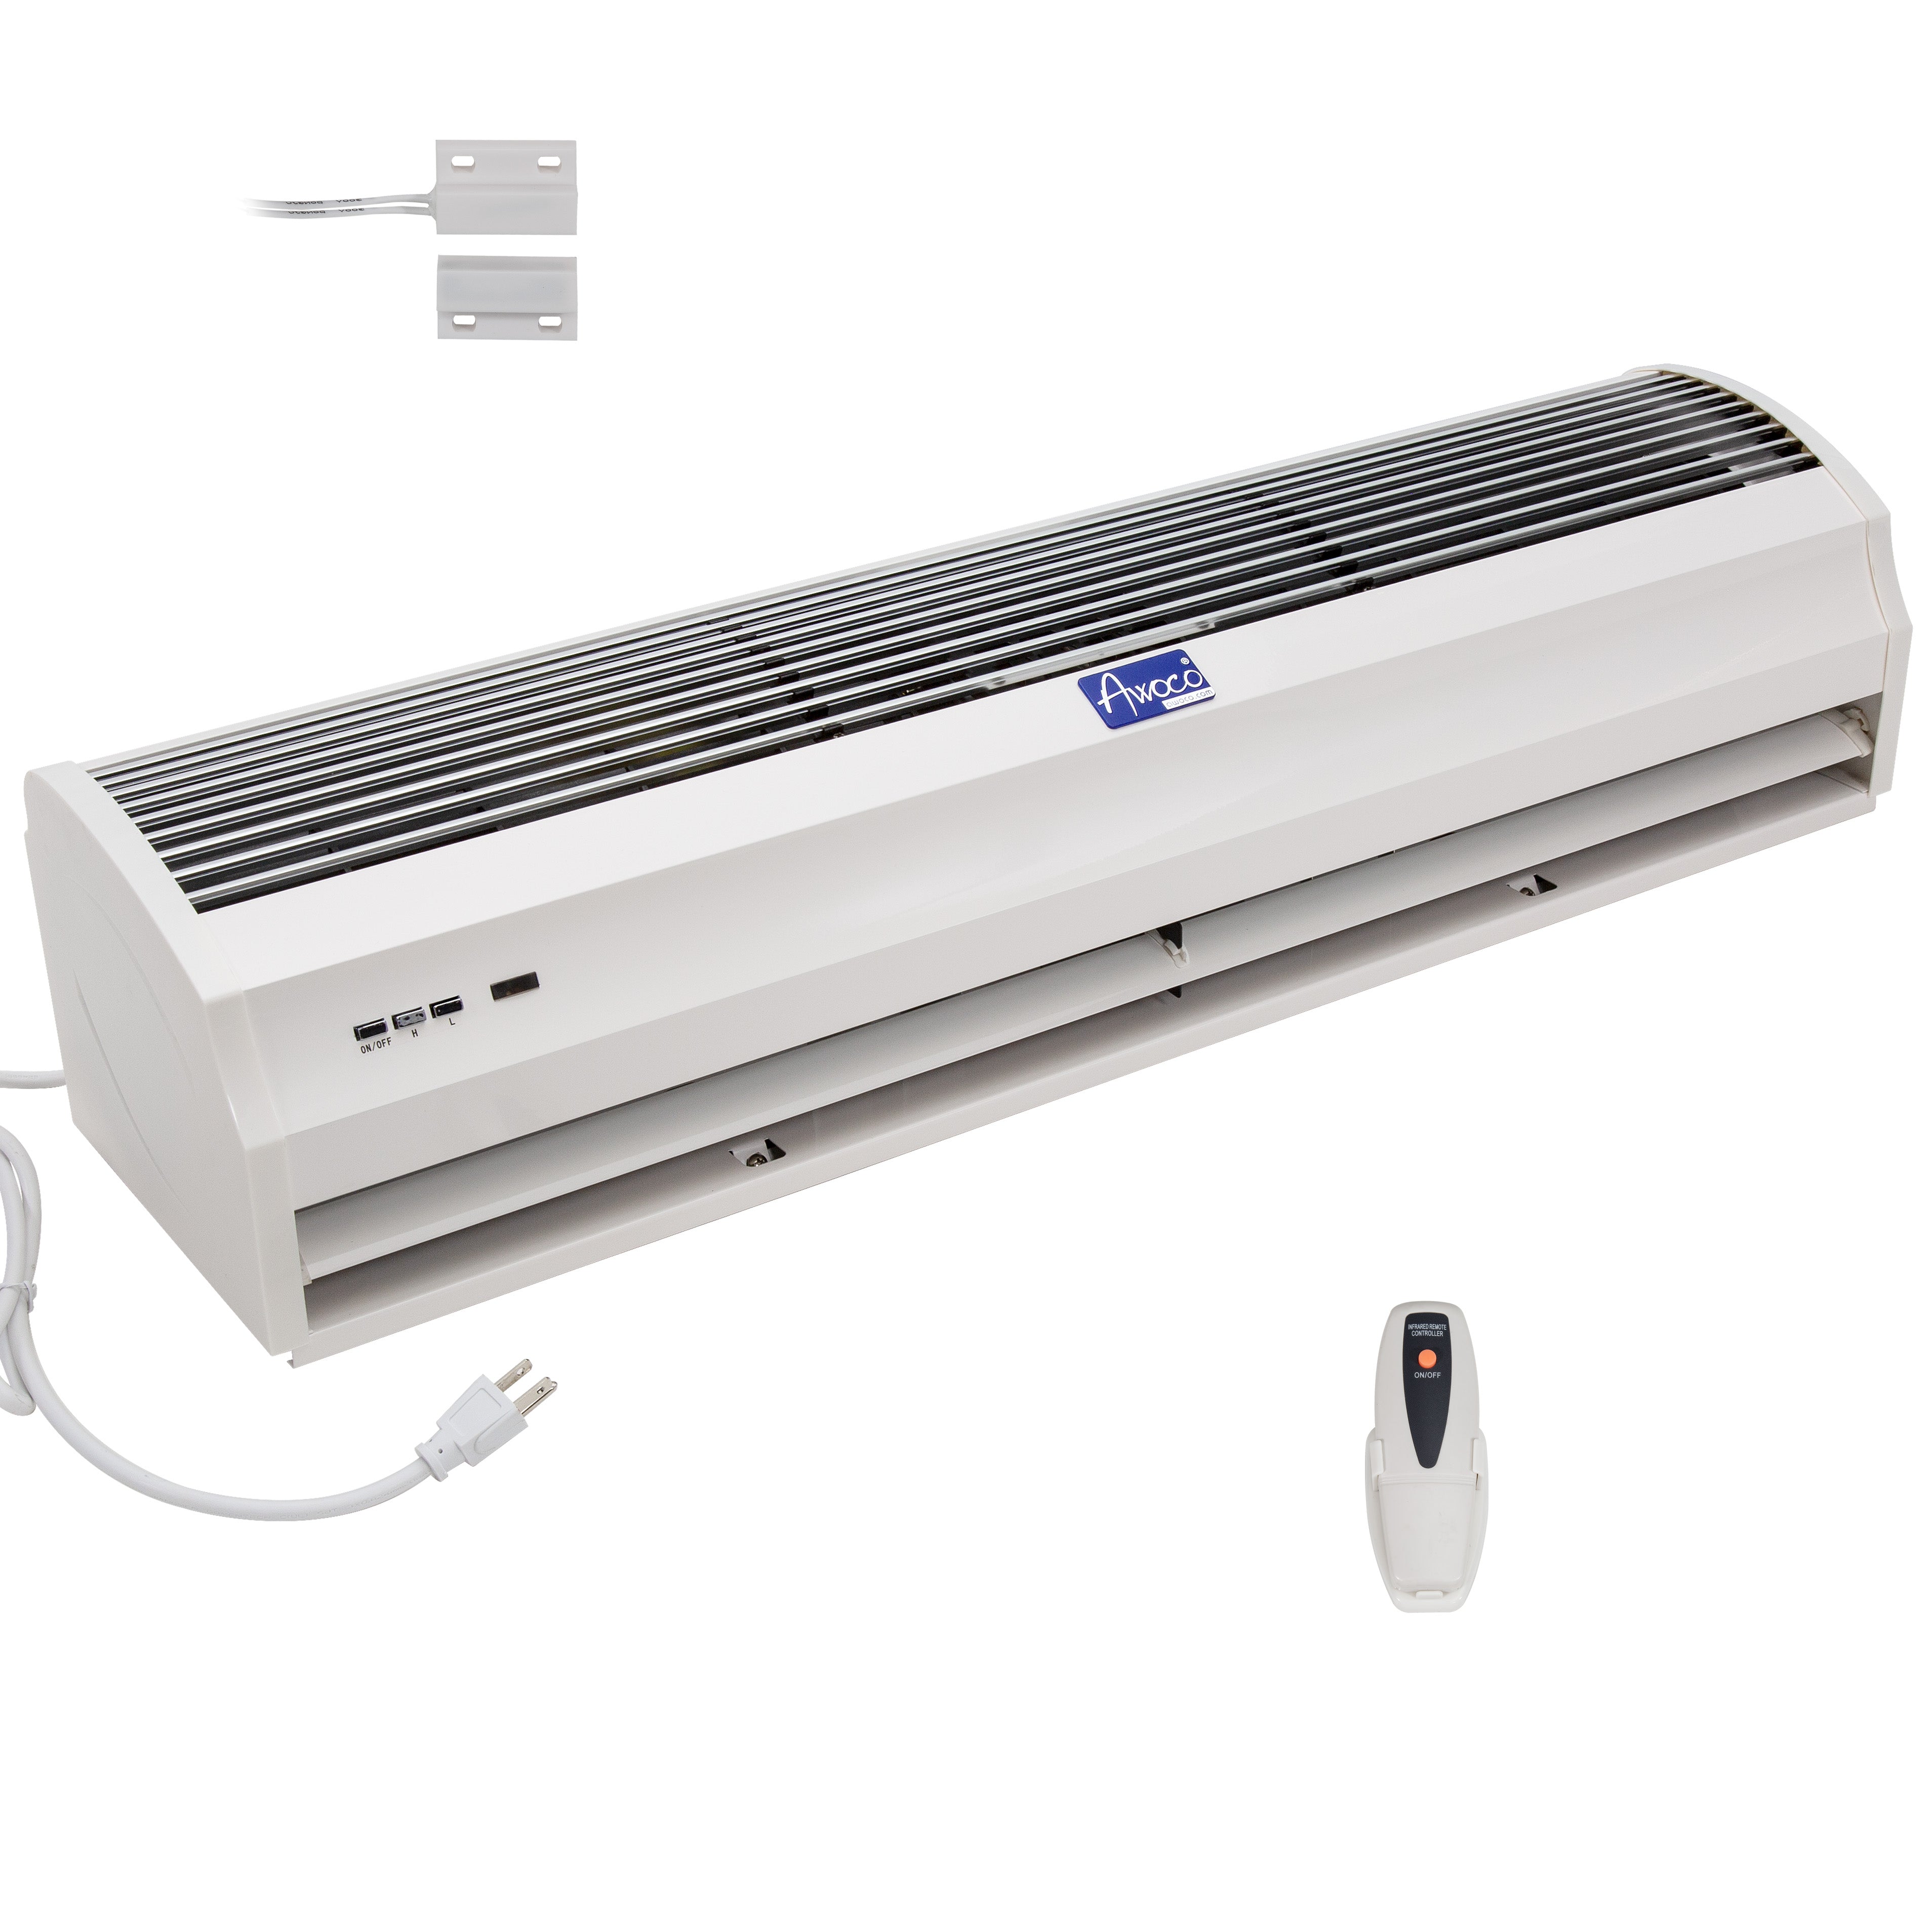 Awoco 40” Slimline 2 Speeds 1250 CFM Indoor Air Curtain, CE Certified, 120V Unheated with Remote Control and Magnetic Switch, Powerful, Quiet, Small Body, Light Weight, 3 Year Warranty